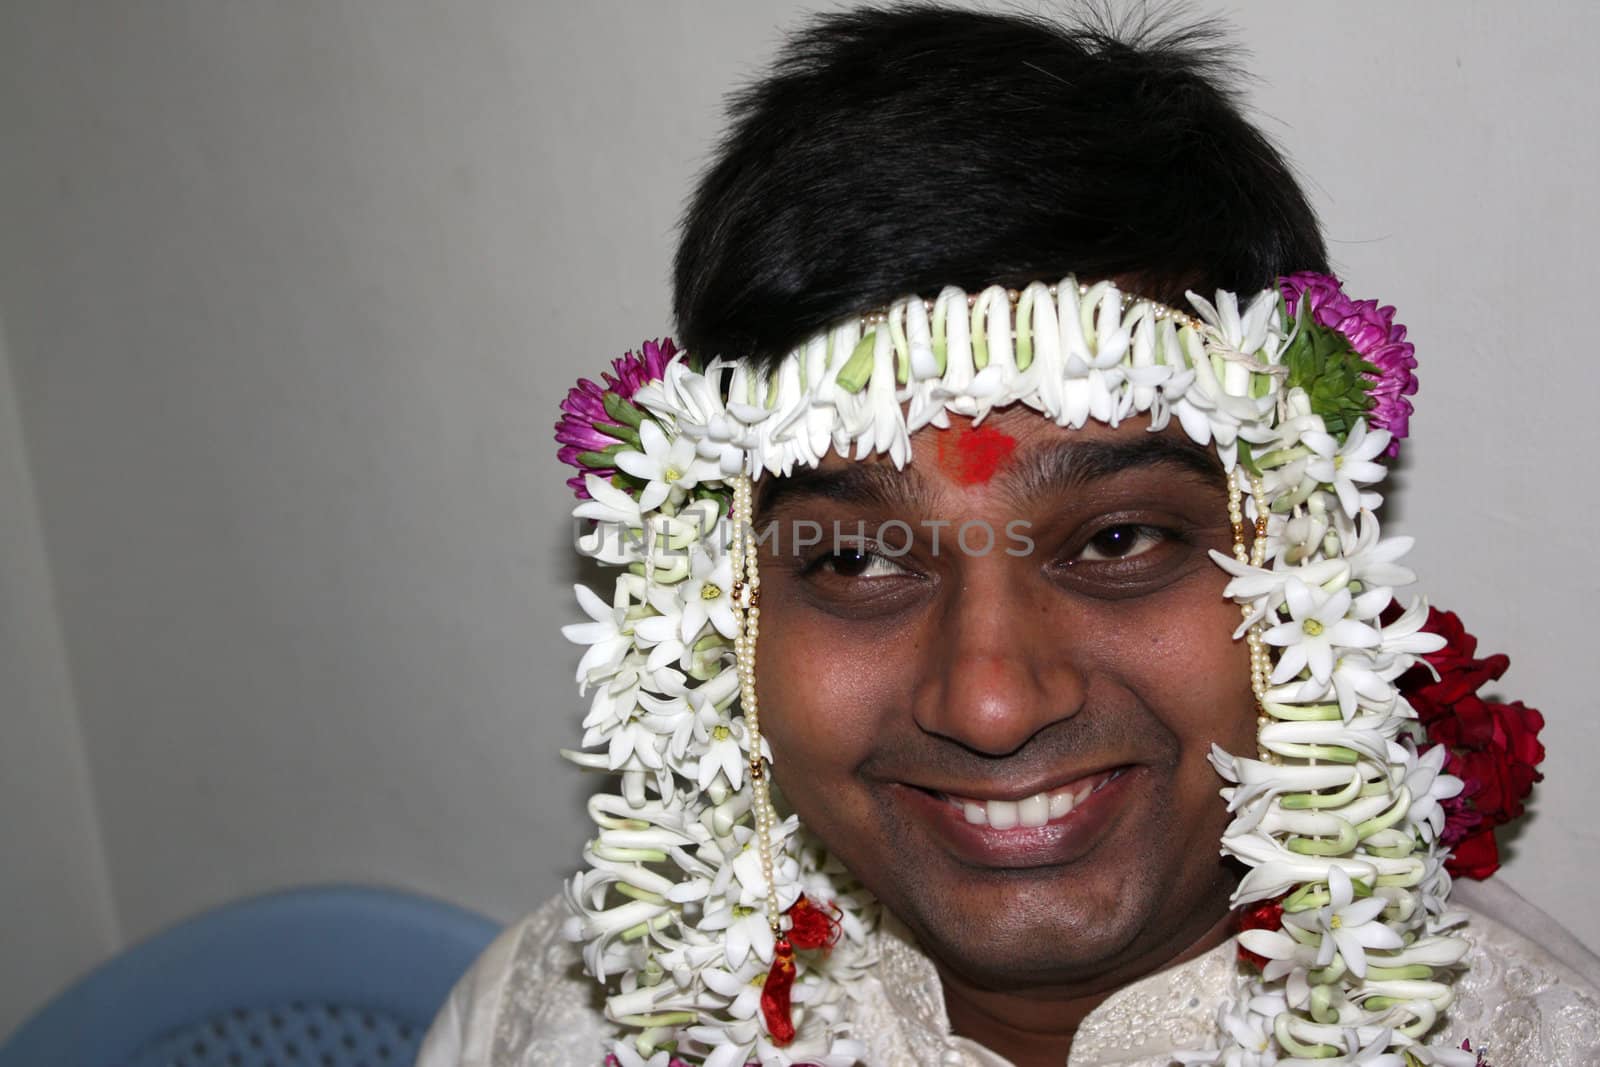 A portrait of a jovial Indian groom in traditional attire of flowers and garlands.